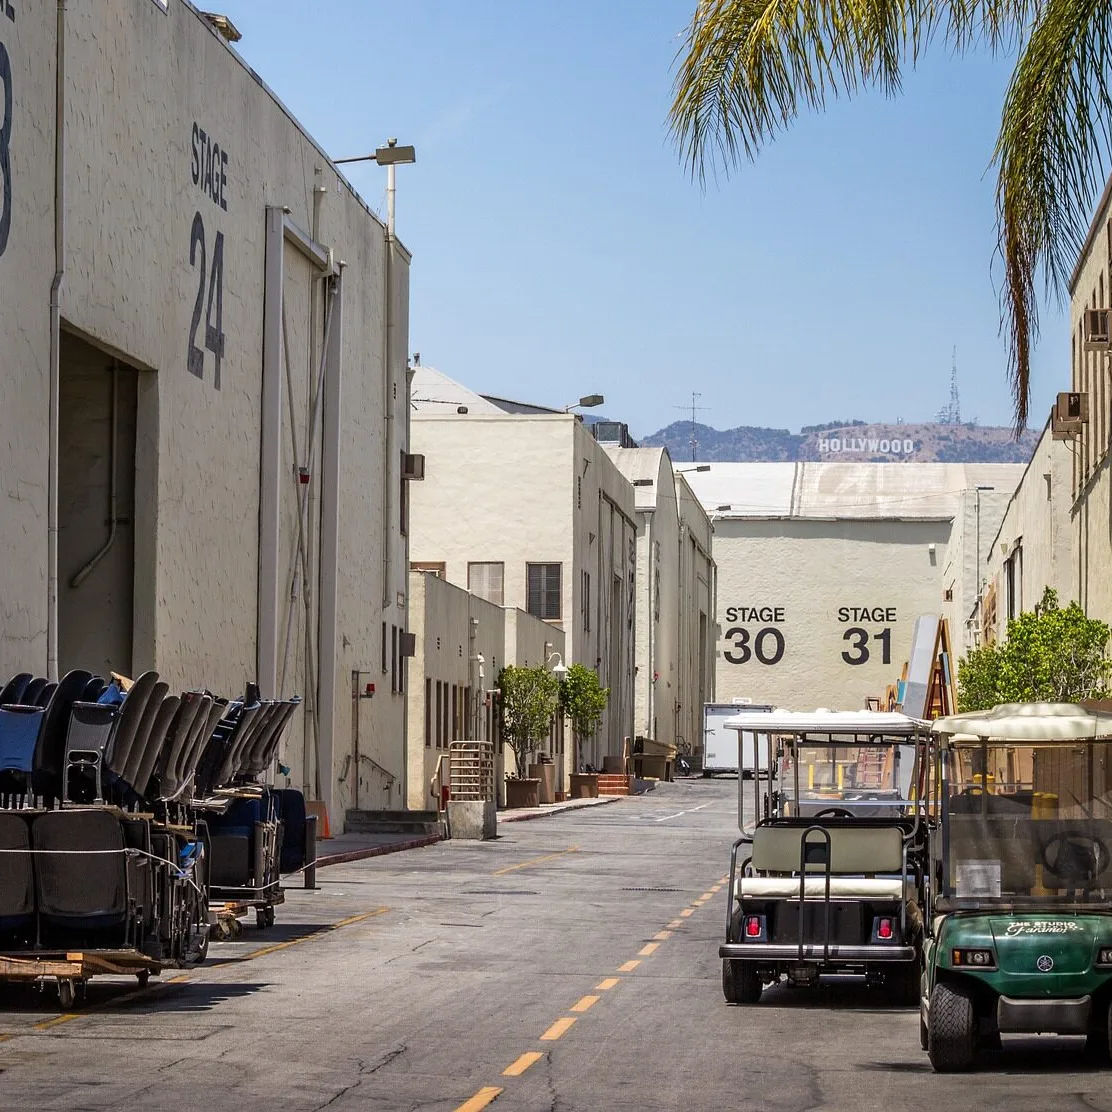 backlot in Hollywood where Studio 3rd parties might shoot